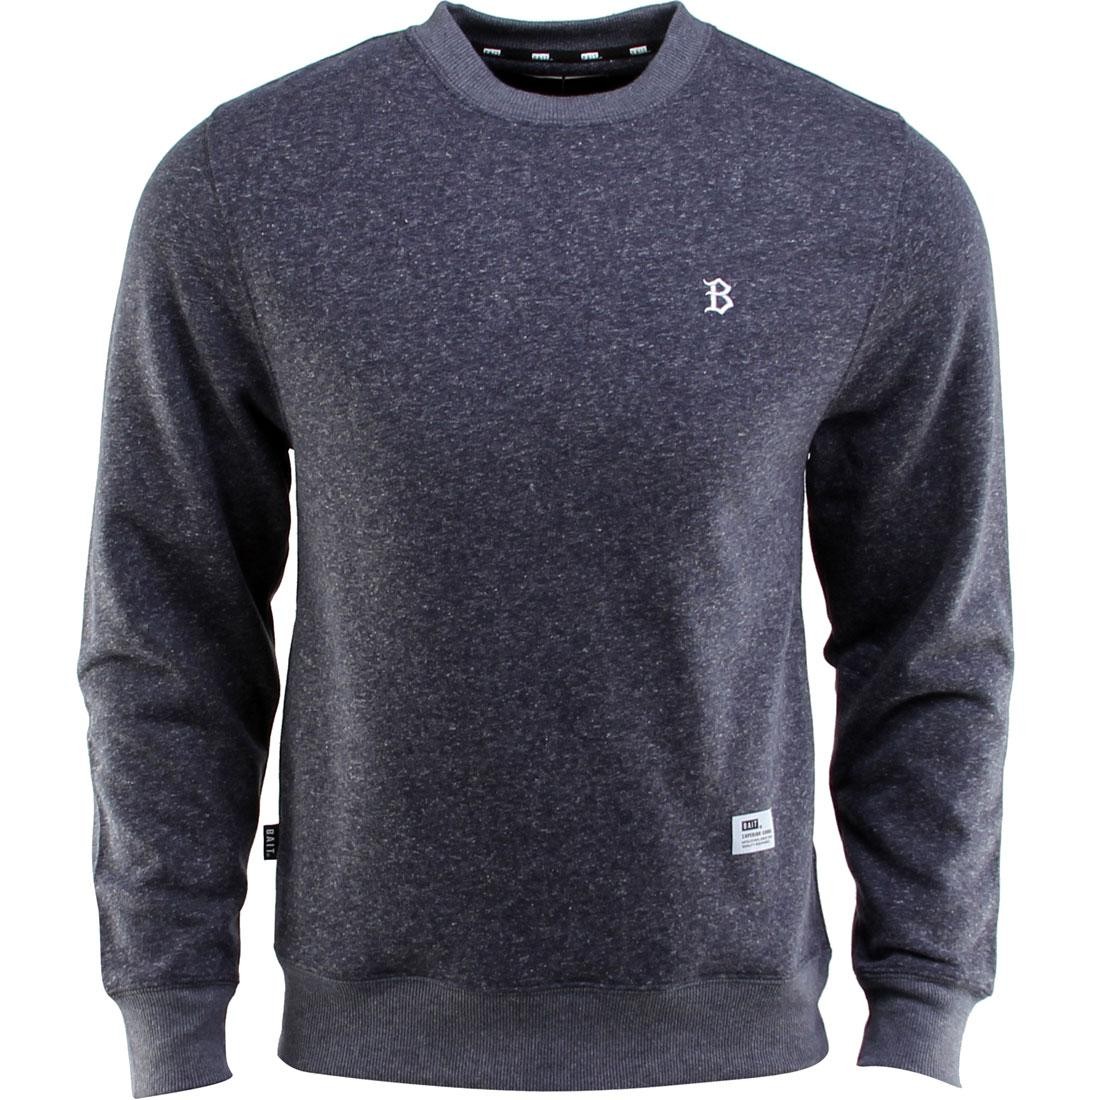 BAIT B Letter Invisible Pockets Fitted Crewneck (navy)